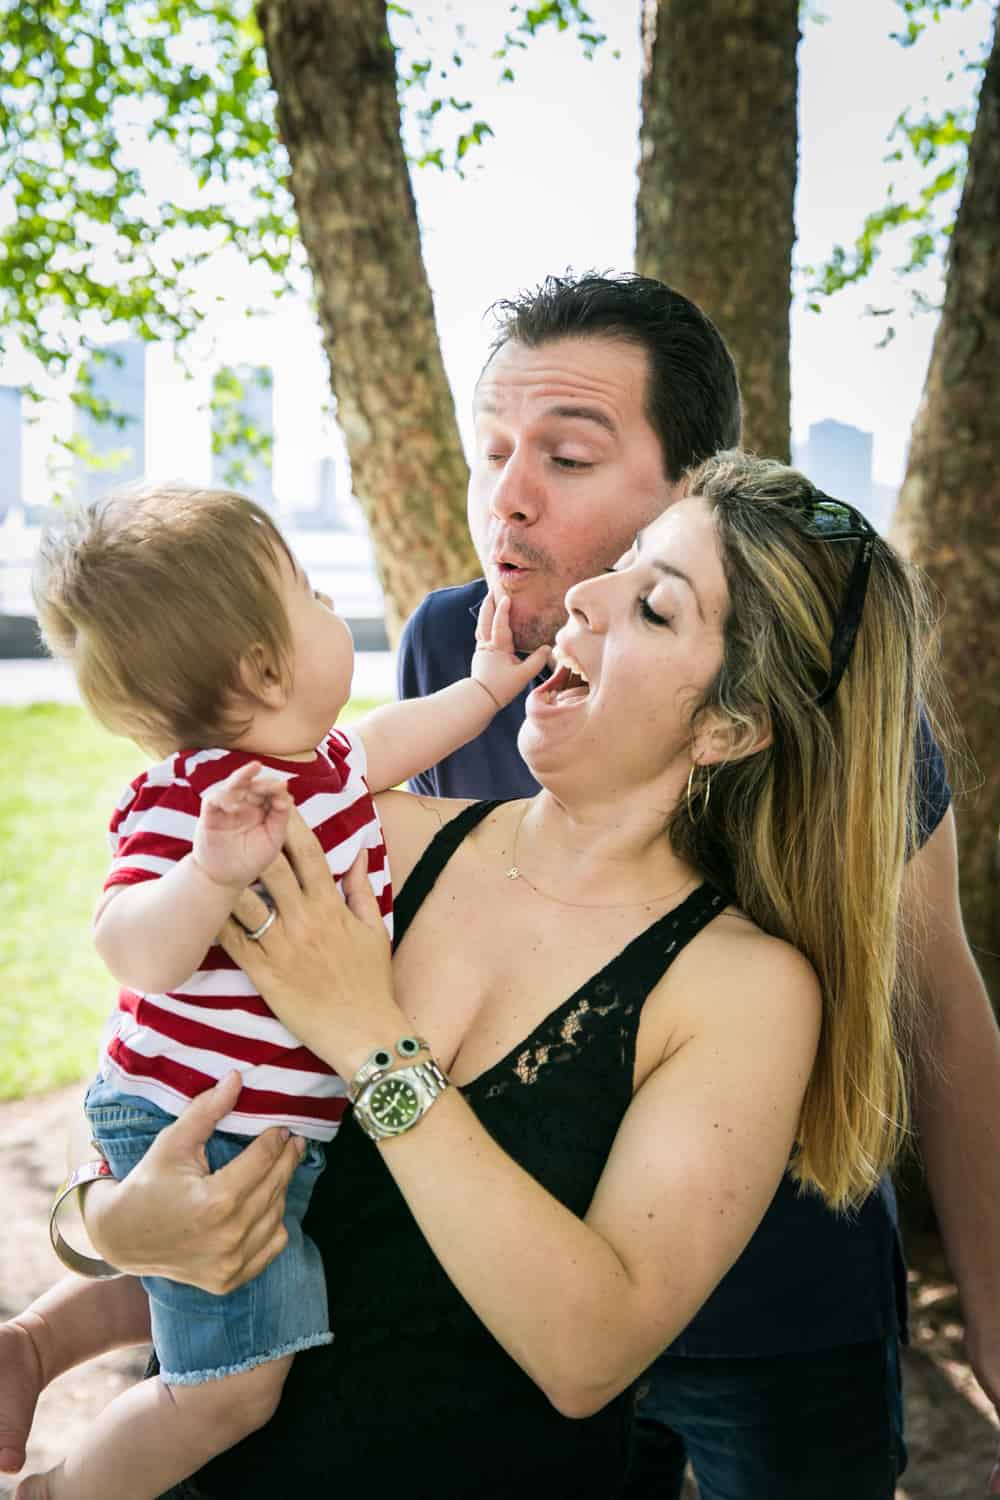 Parents playing with baby beside tree during a Battery Park family portrait